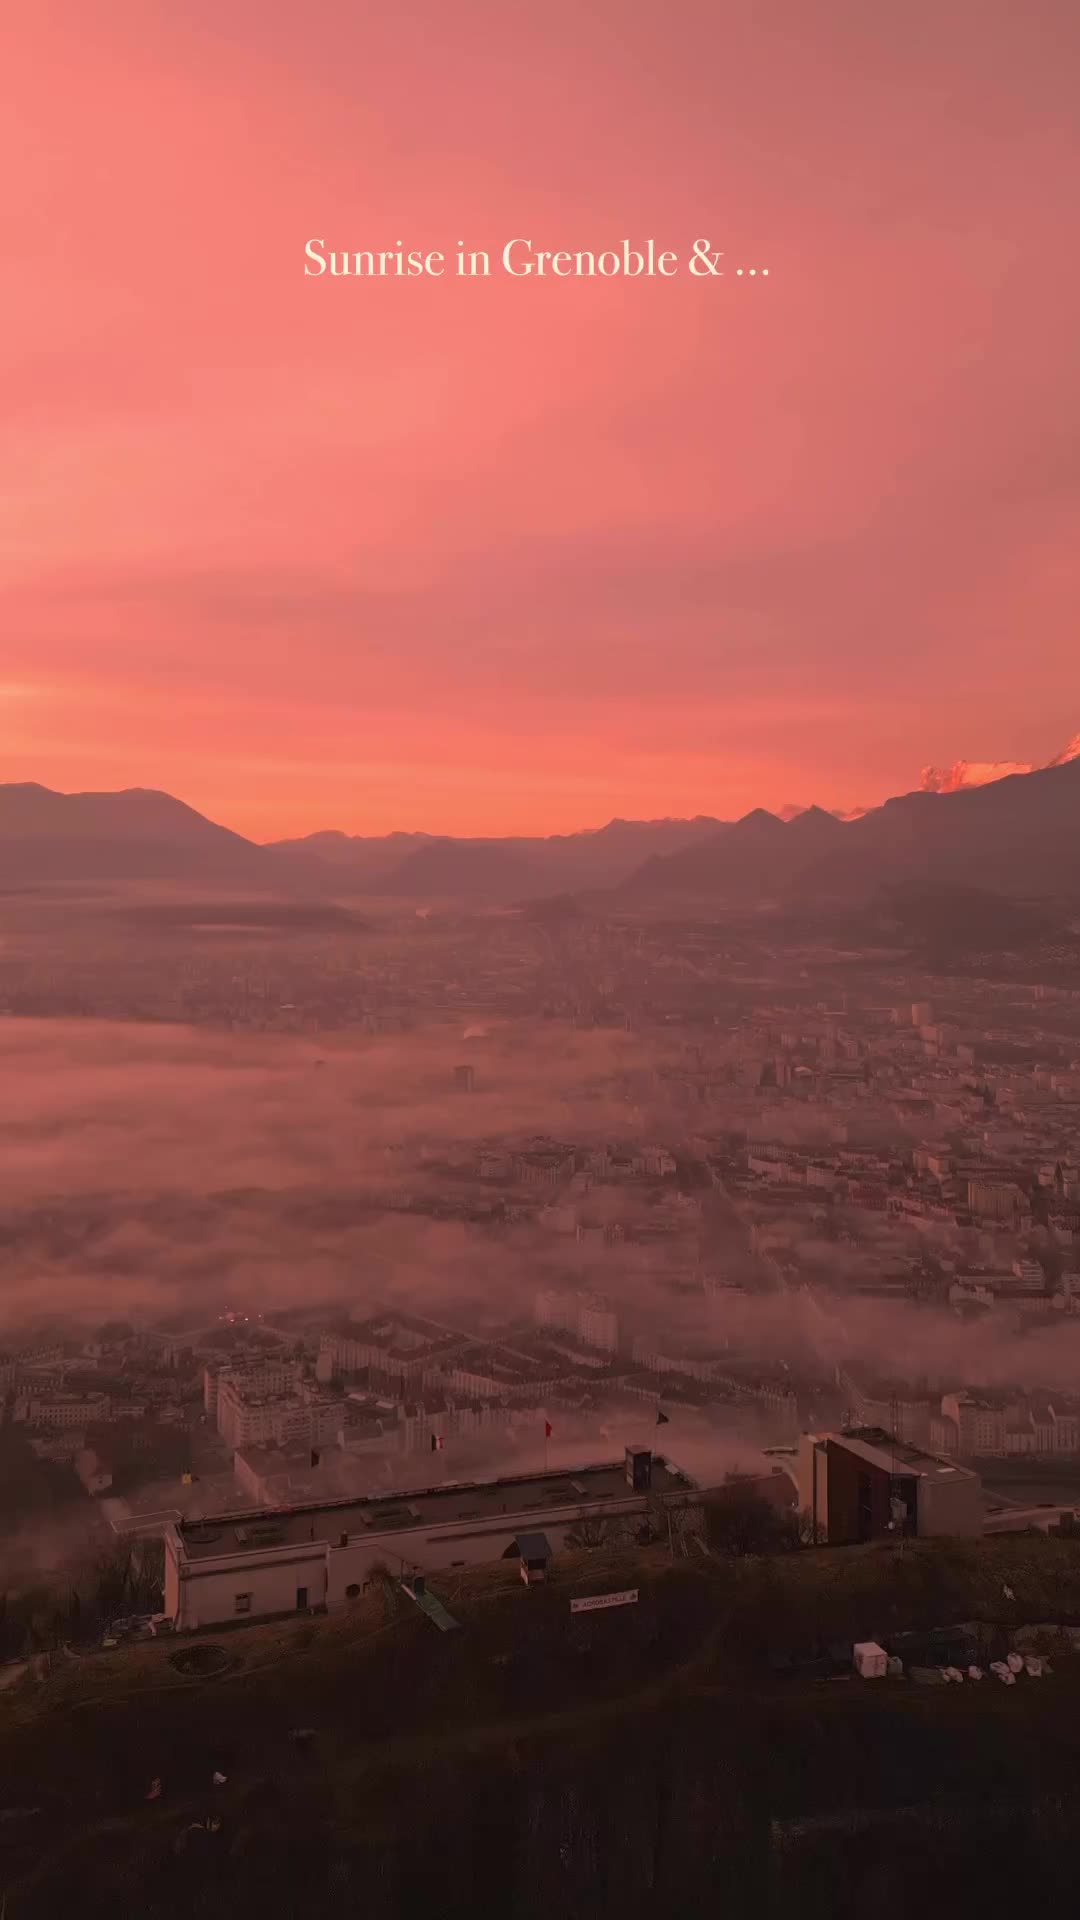 Sunrise or Sunset in Grenoble? 🌄 Discover the Magic